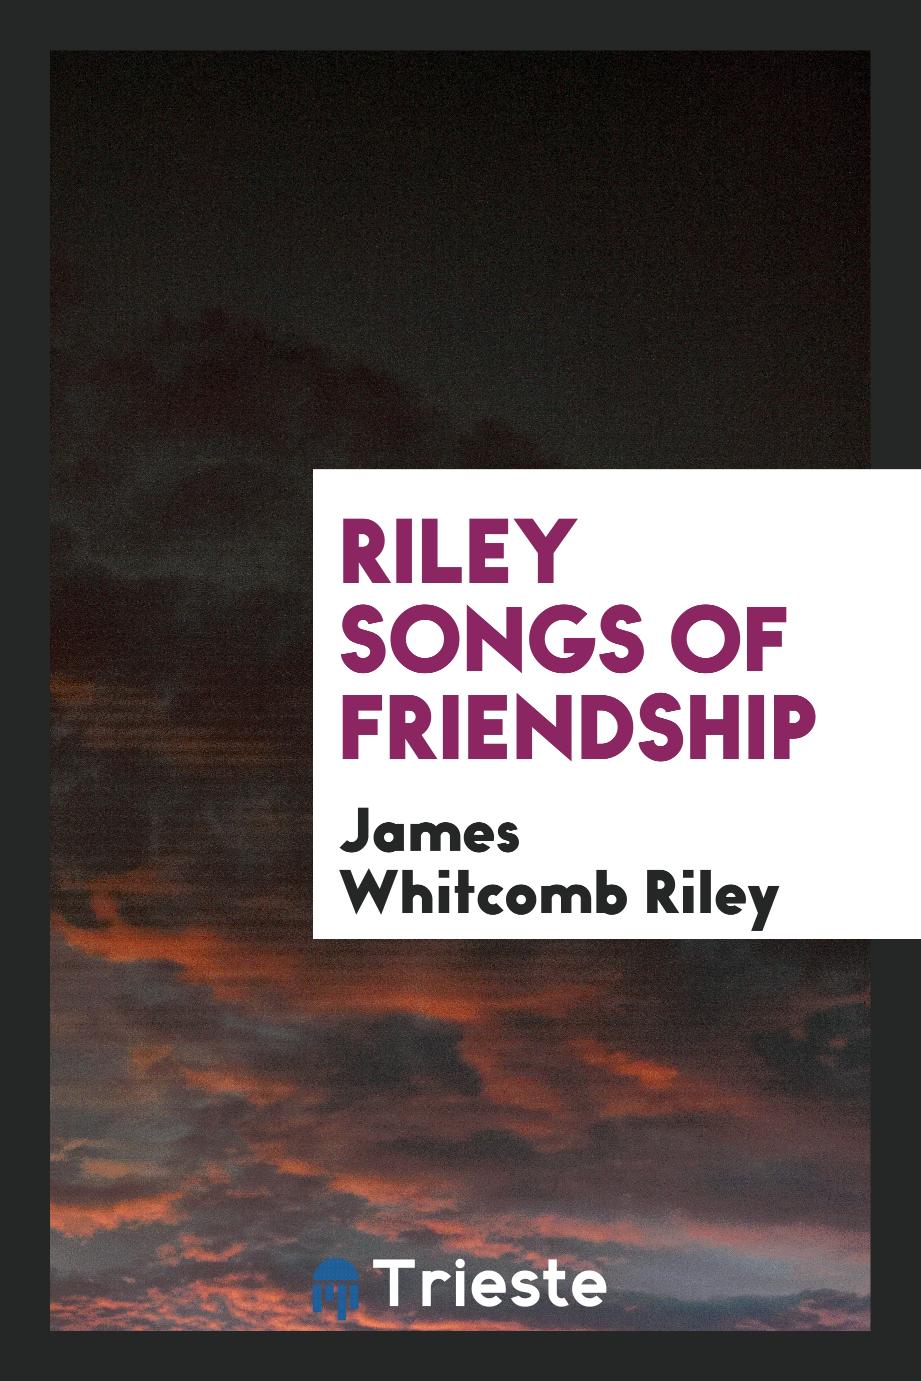 Riley songs of friendship